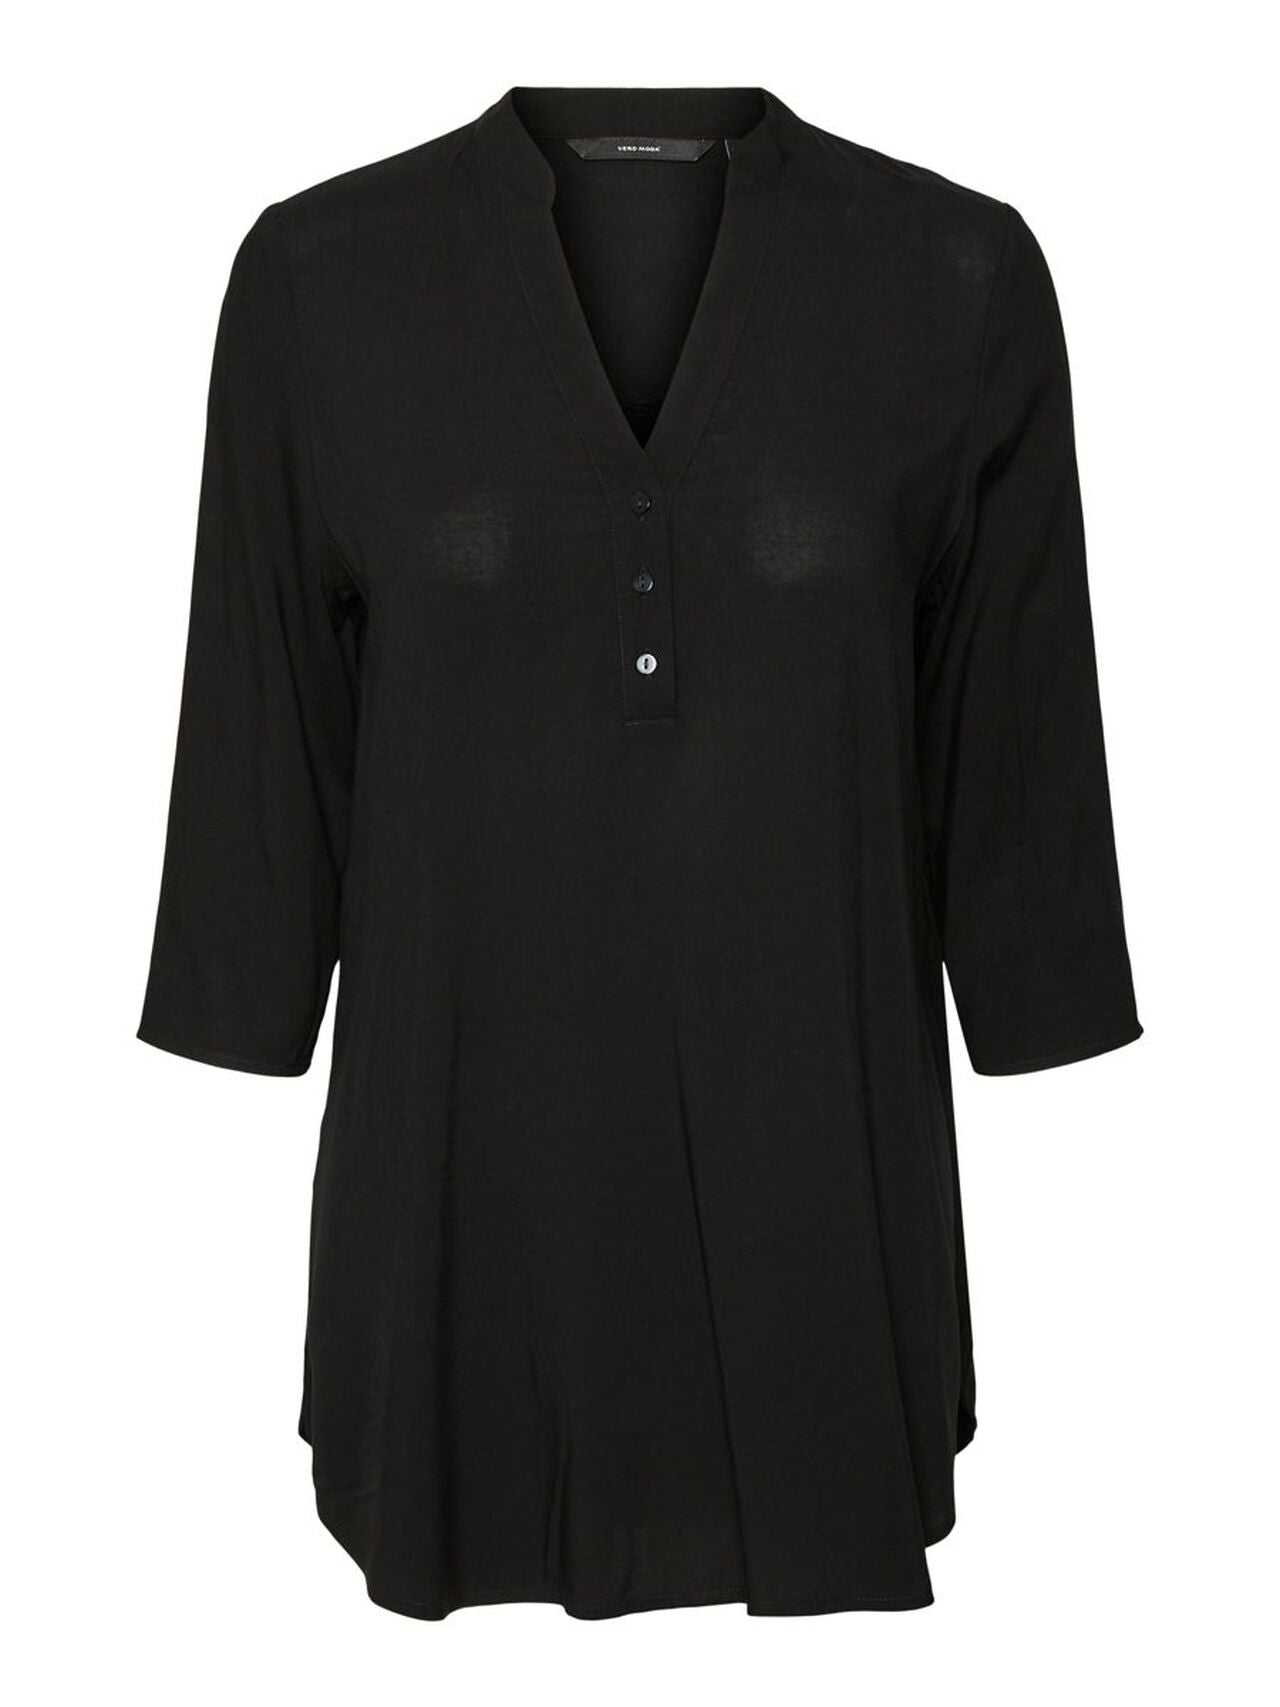 Simone 3/4 Tunic Top - Available in 2 Colours